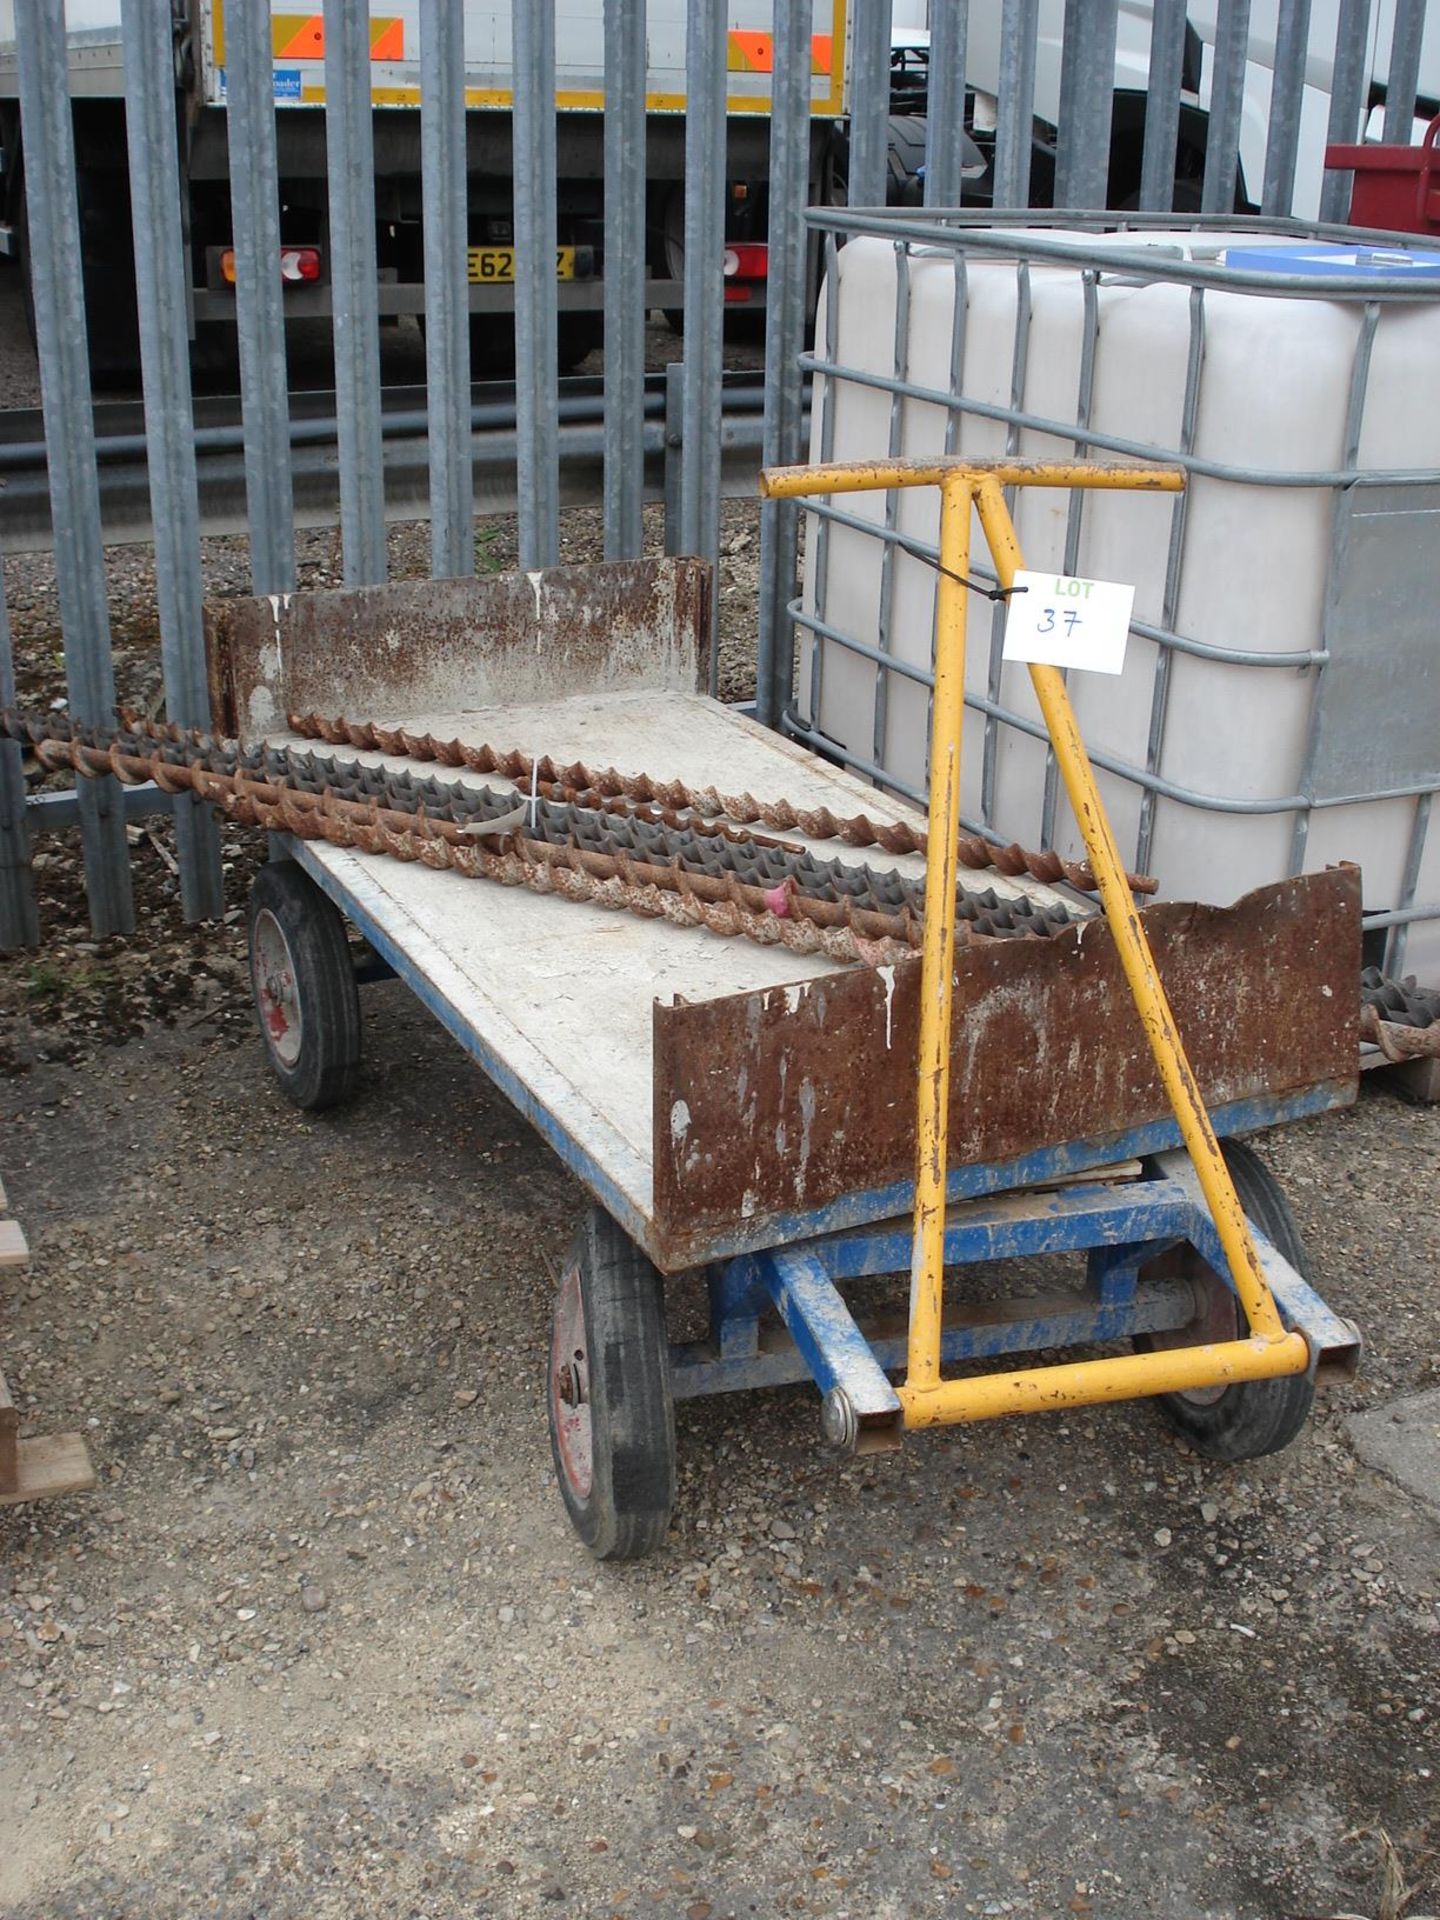 4 Wheeled Pull Along Cart - Solid Tyres - Base Measures 150cm x 75cm